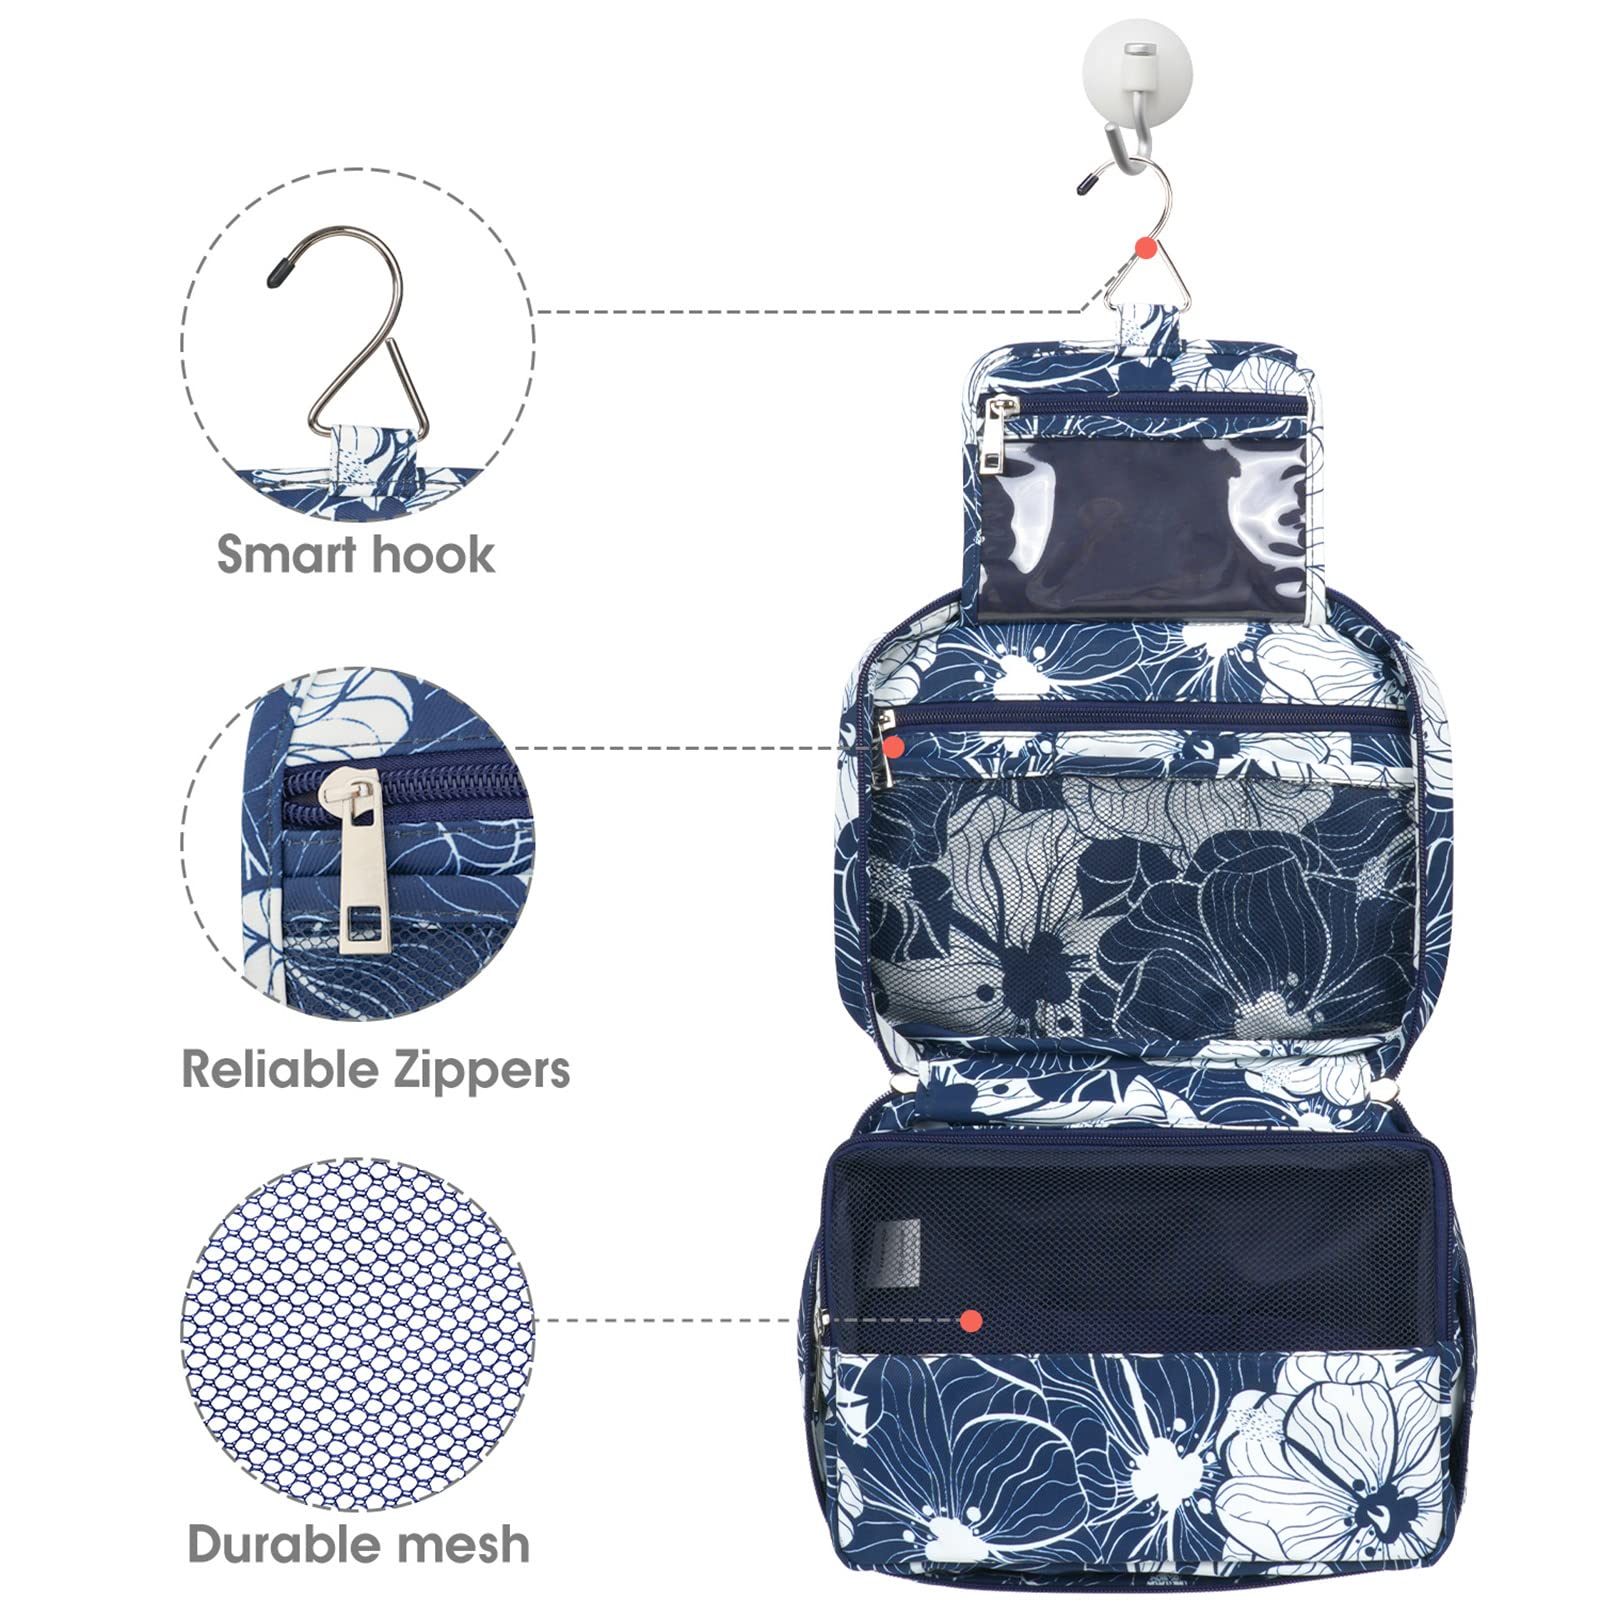 Buy Compact Hanging Toiletry Bag for USD 20.00 | Travelon Bags